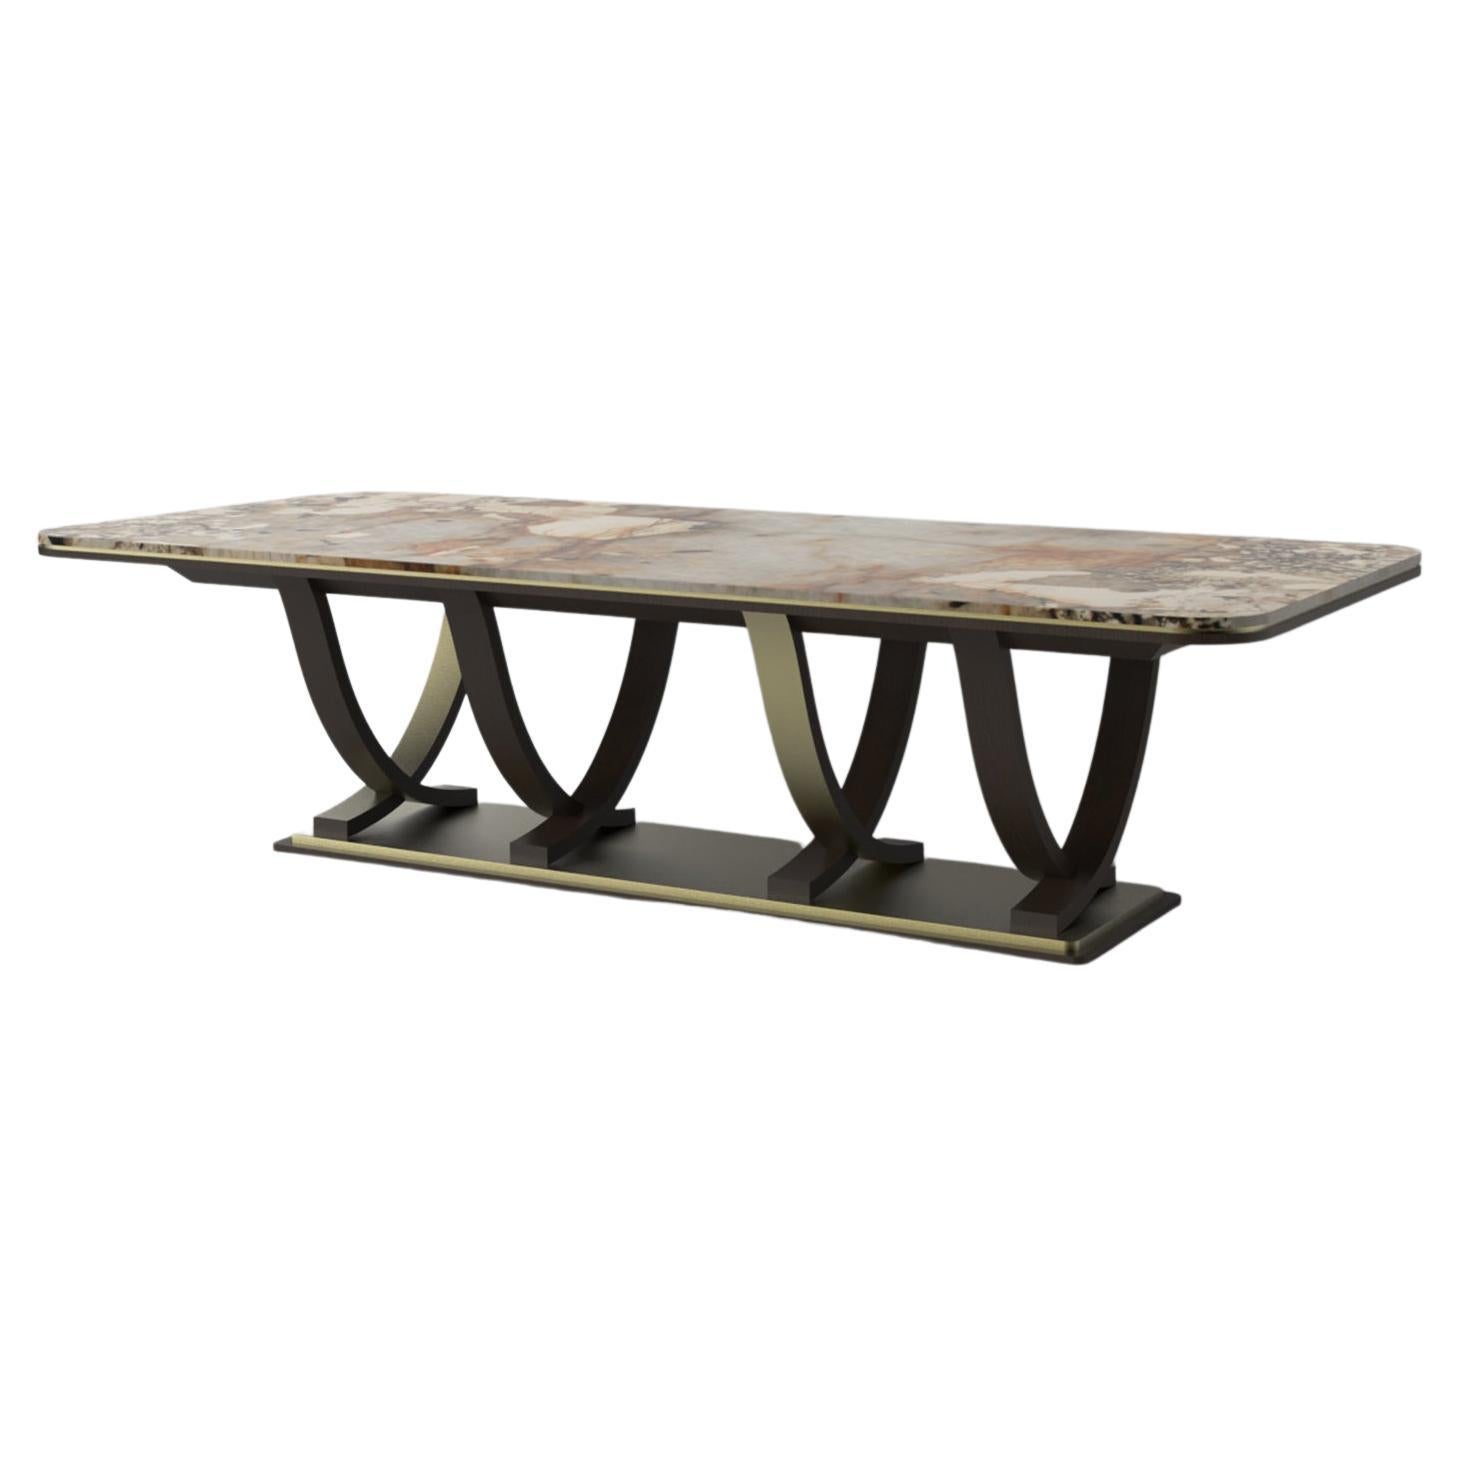 Art Deco Fontaine 10-Seat Dining Table with Patagonia Granite by Greenapple